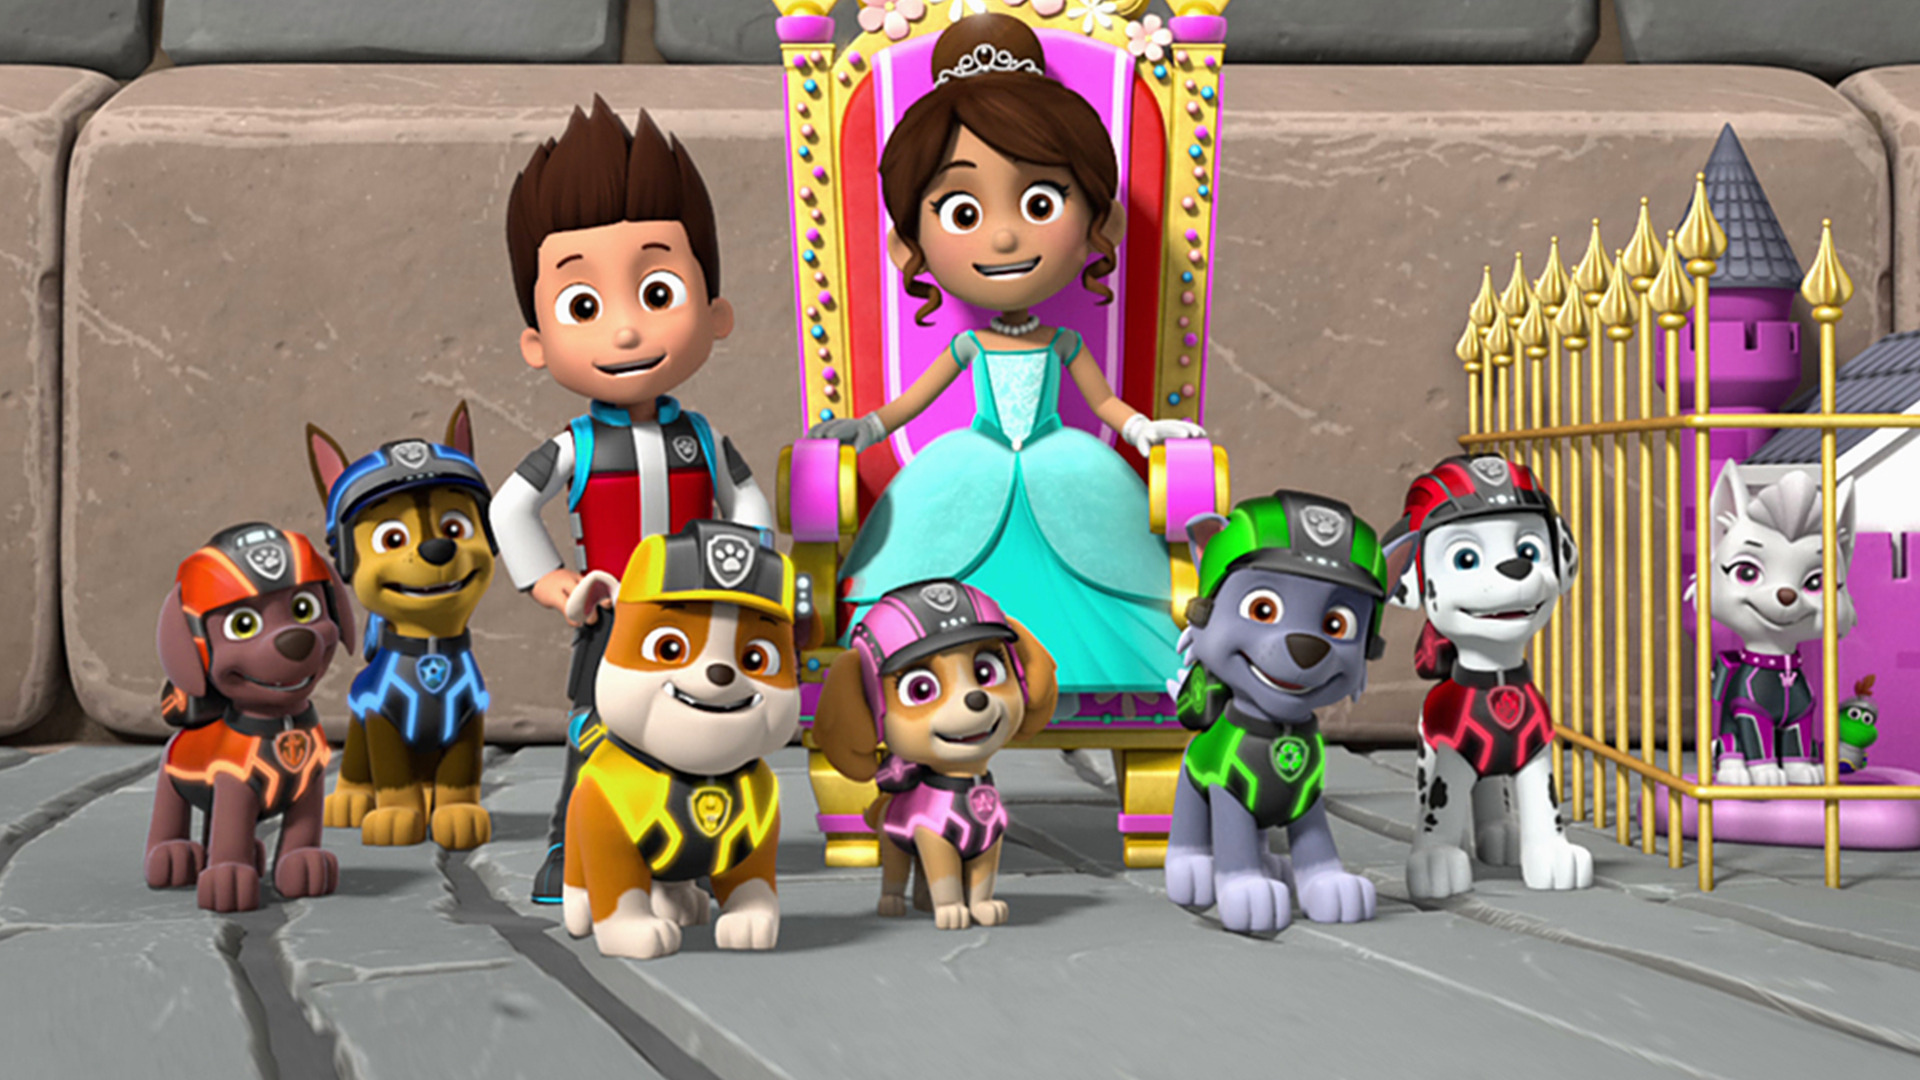 Watch PAW Patrol Season 4 Episode Mission Save the Royal Throne - Full show on Paramount Plus